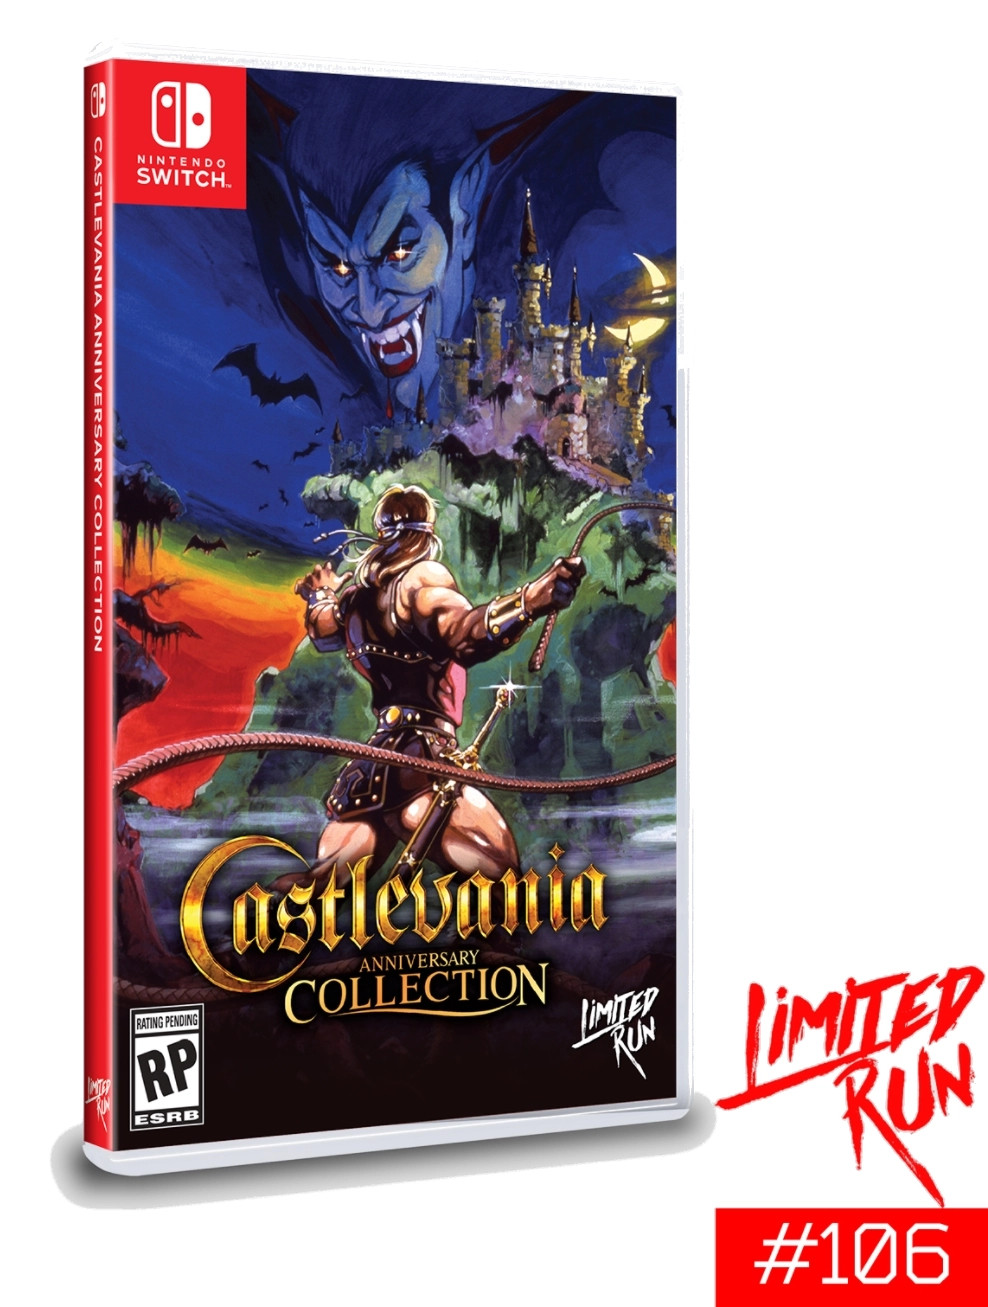 Castlevania Anniversary Collection (Limited Run Games) - Nintendo Switch